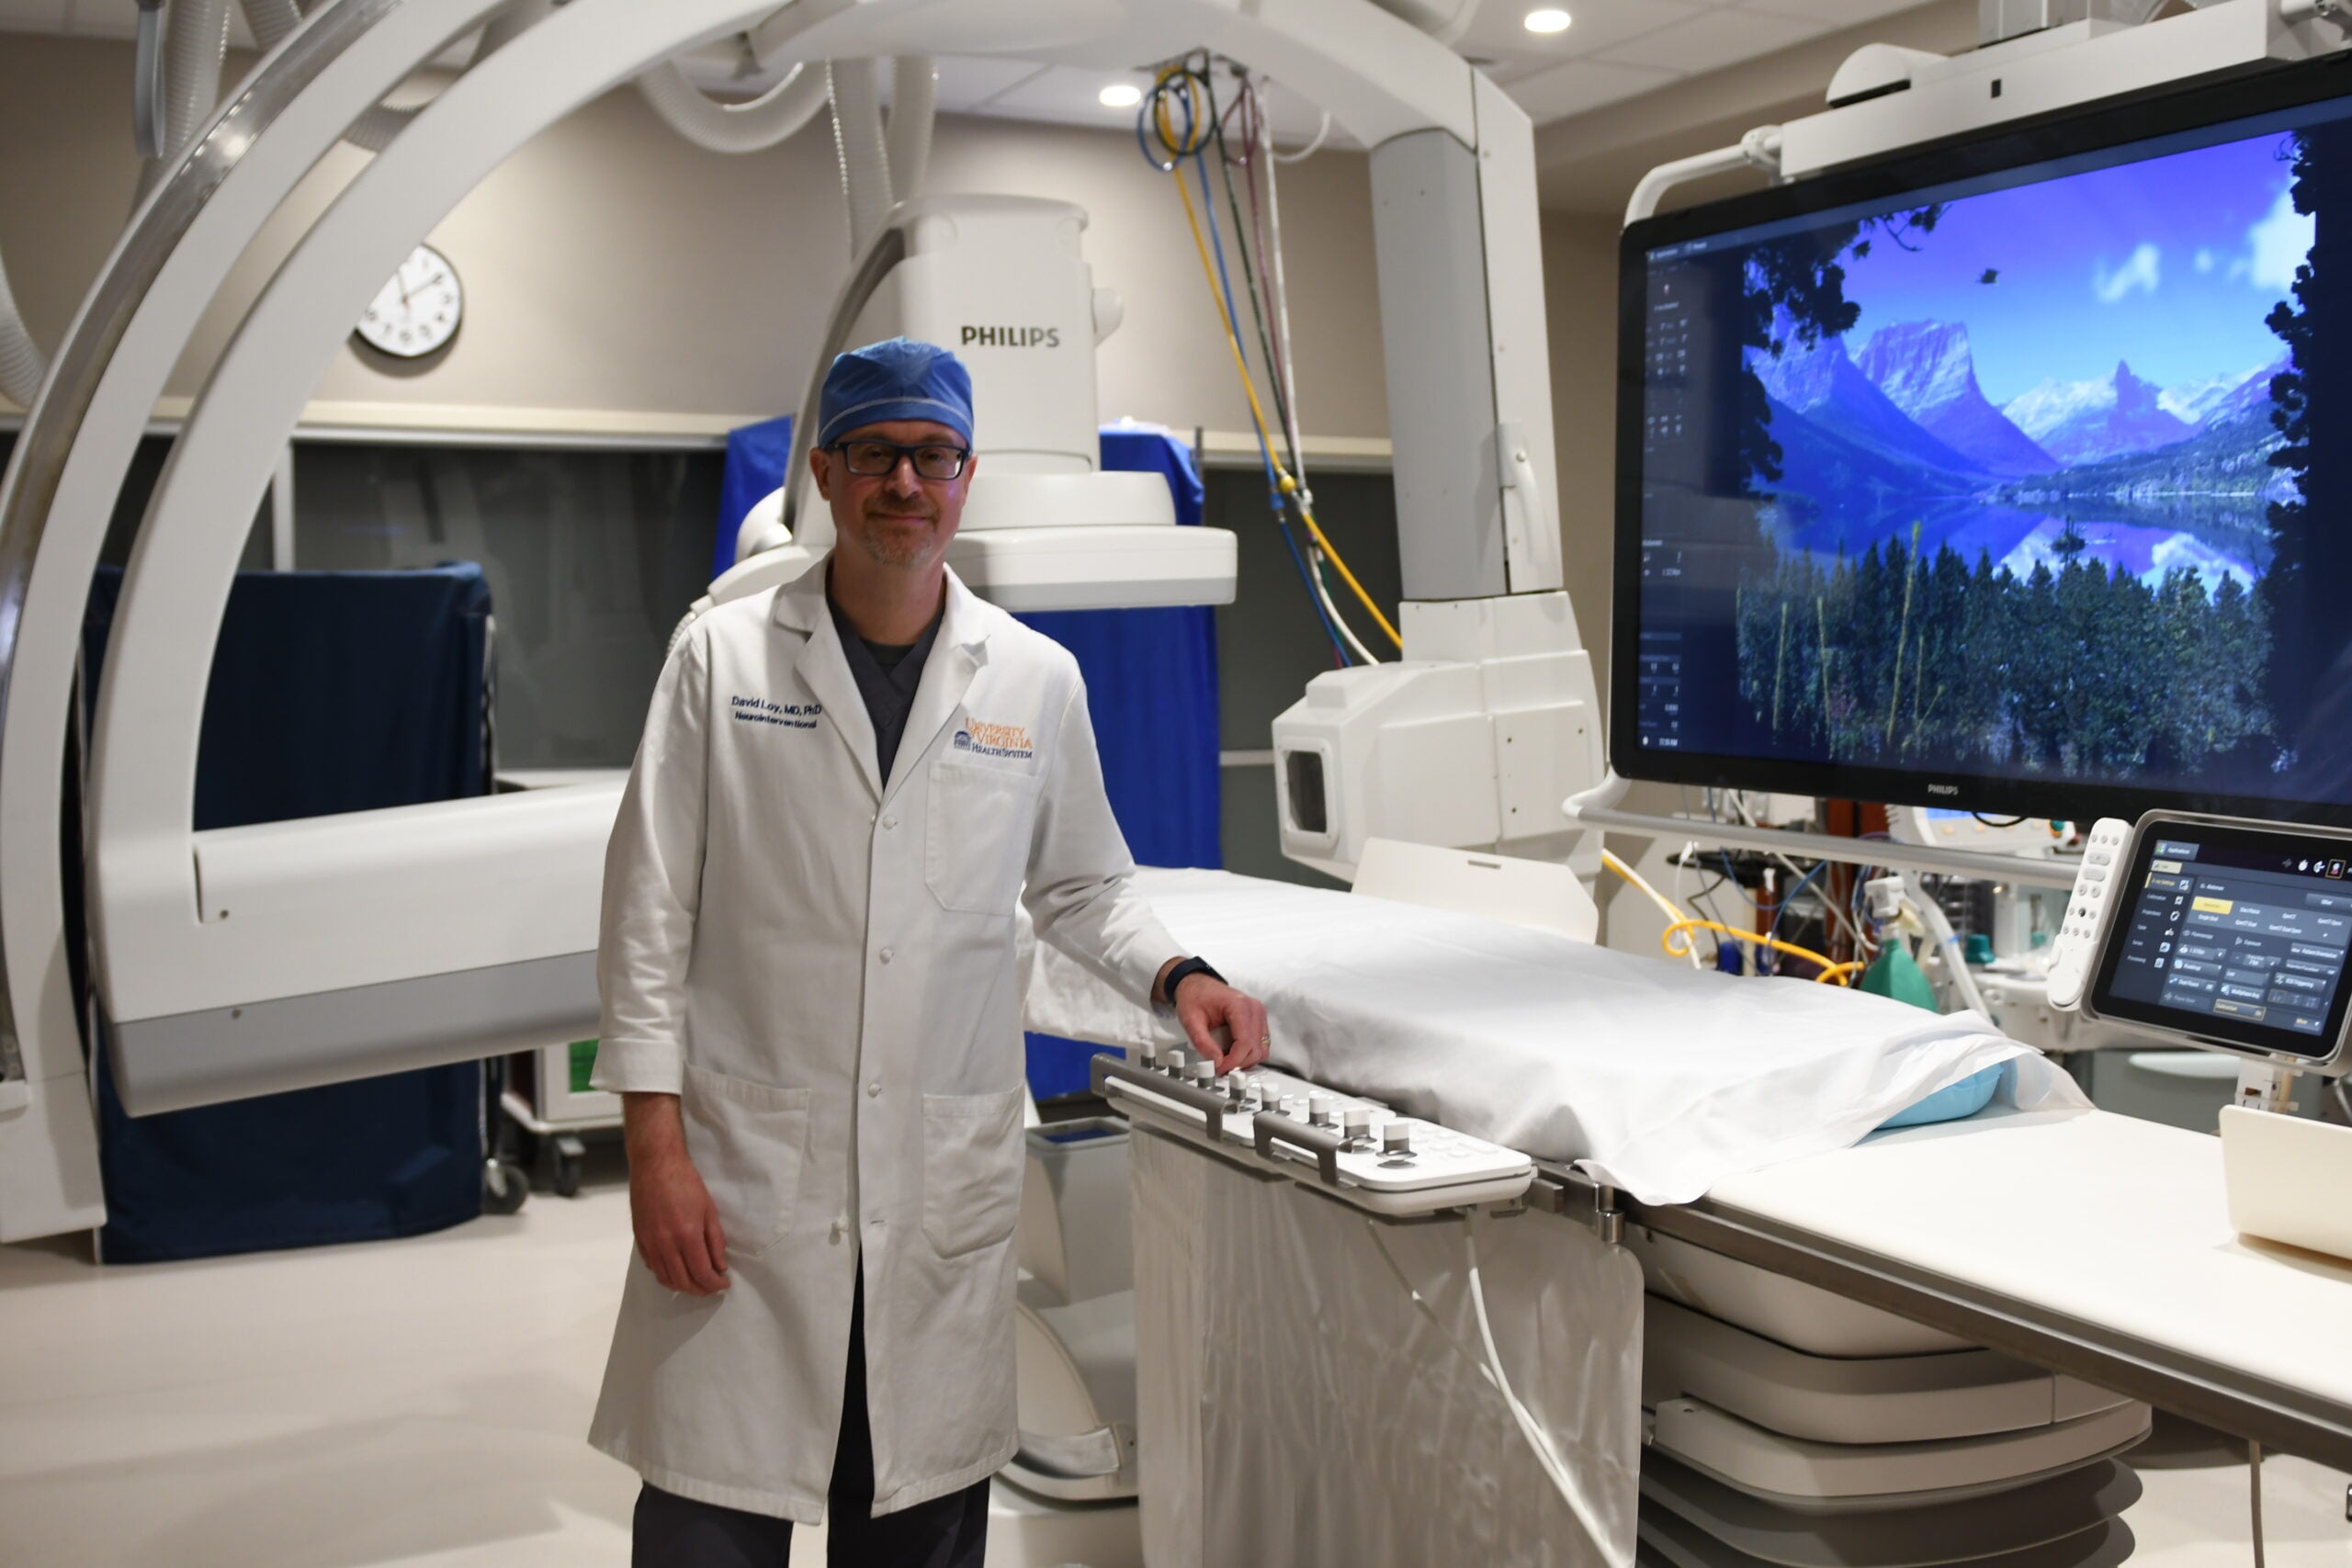 uva radiologist stands by imaging technology